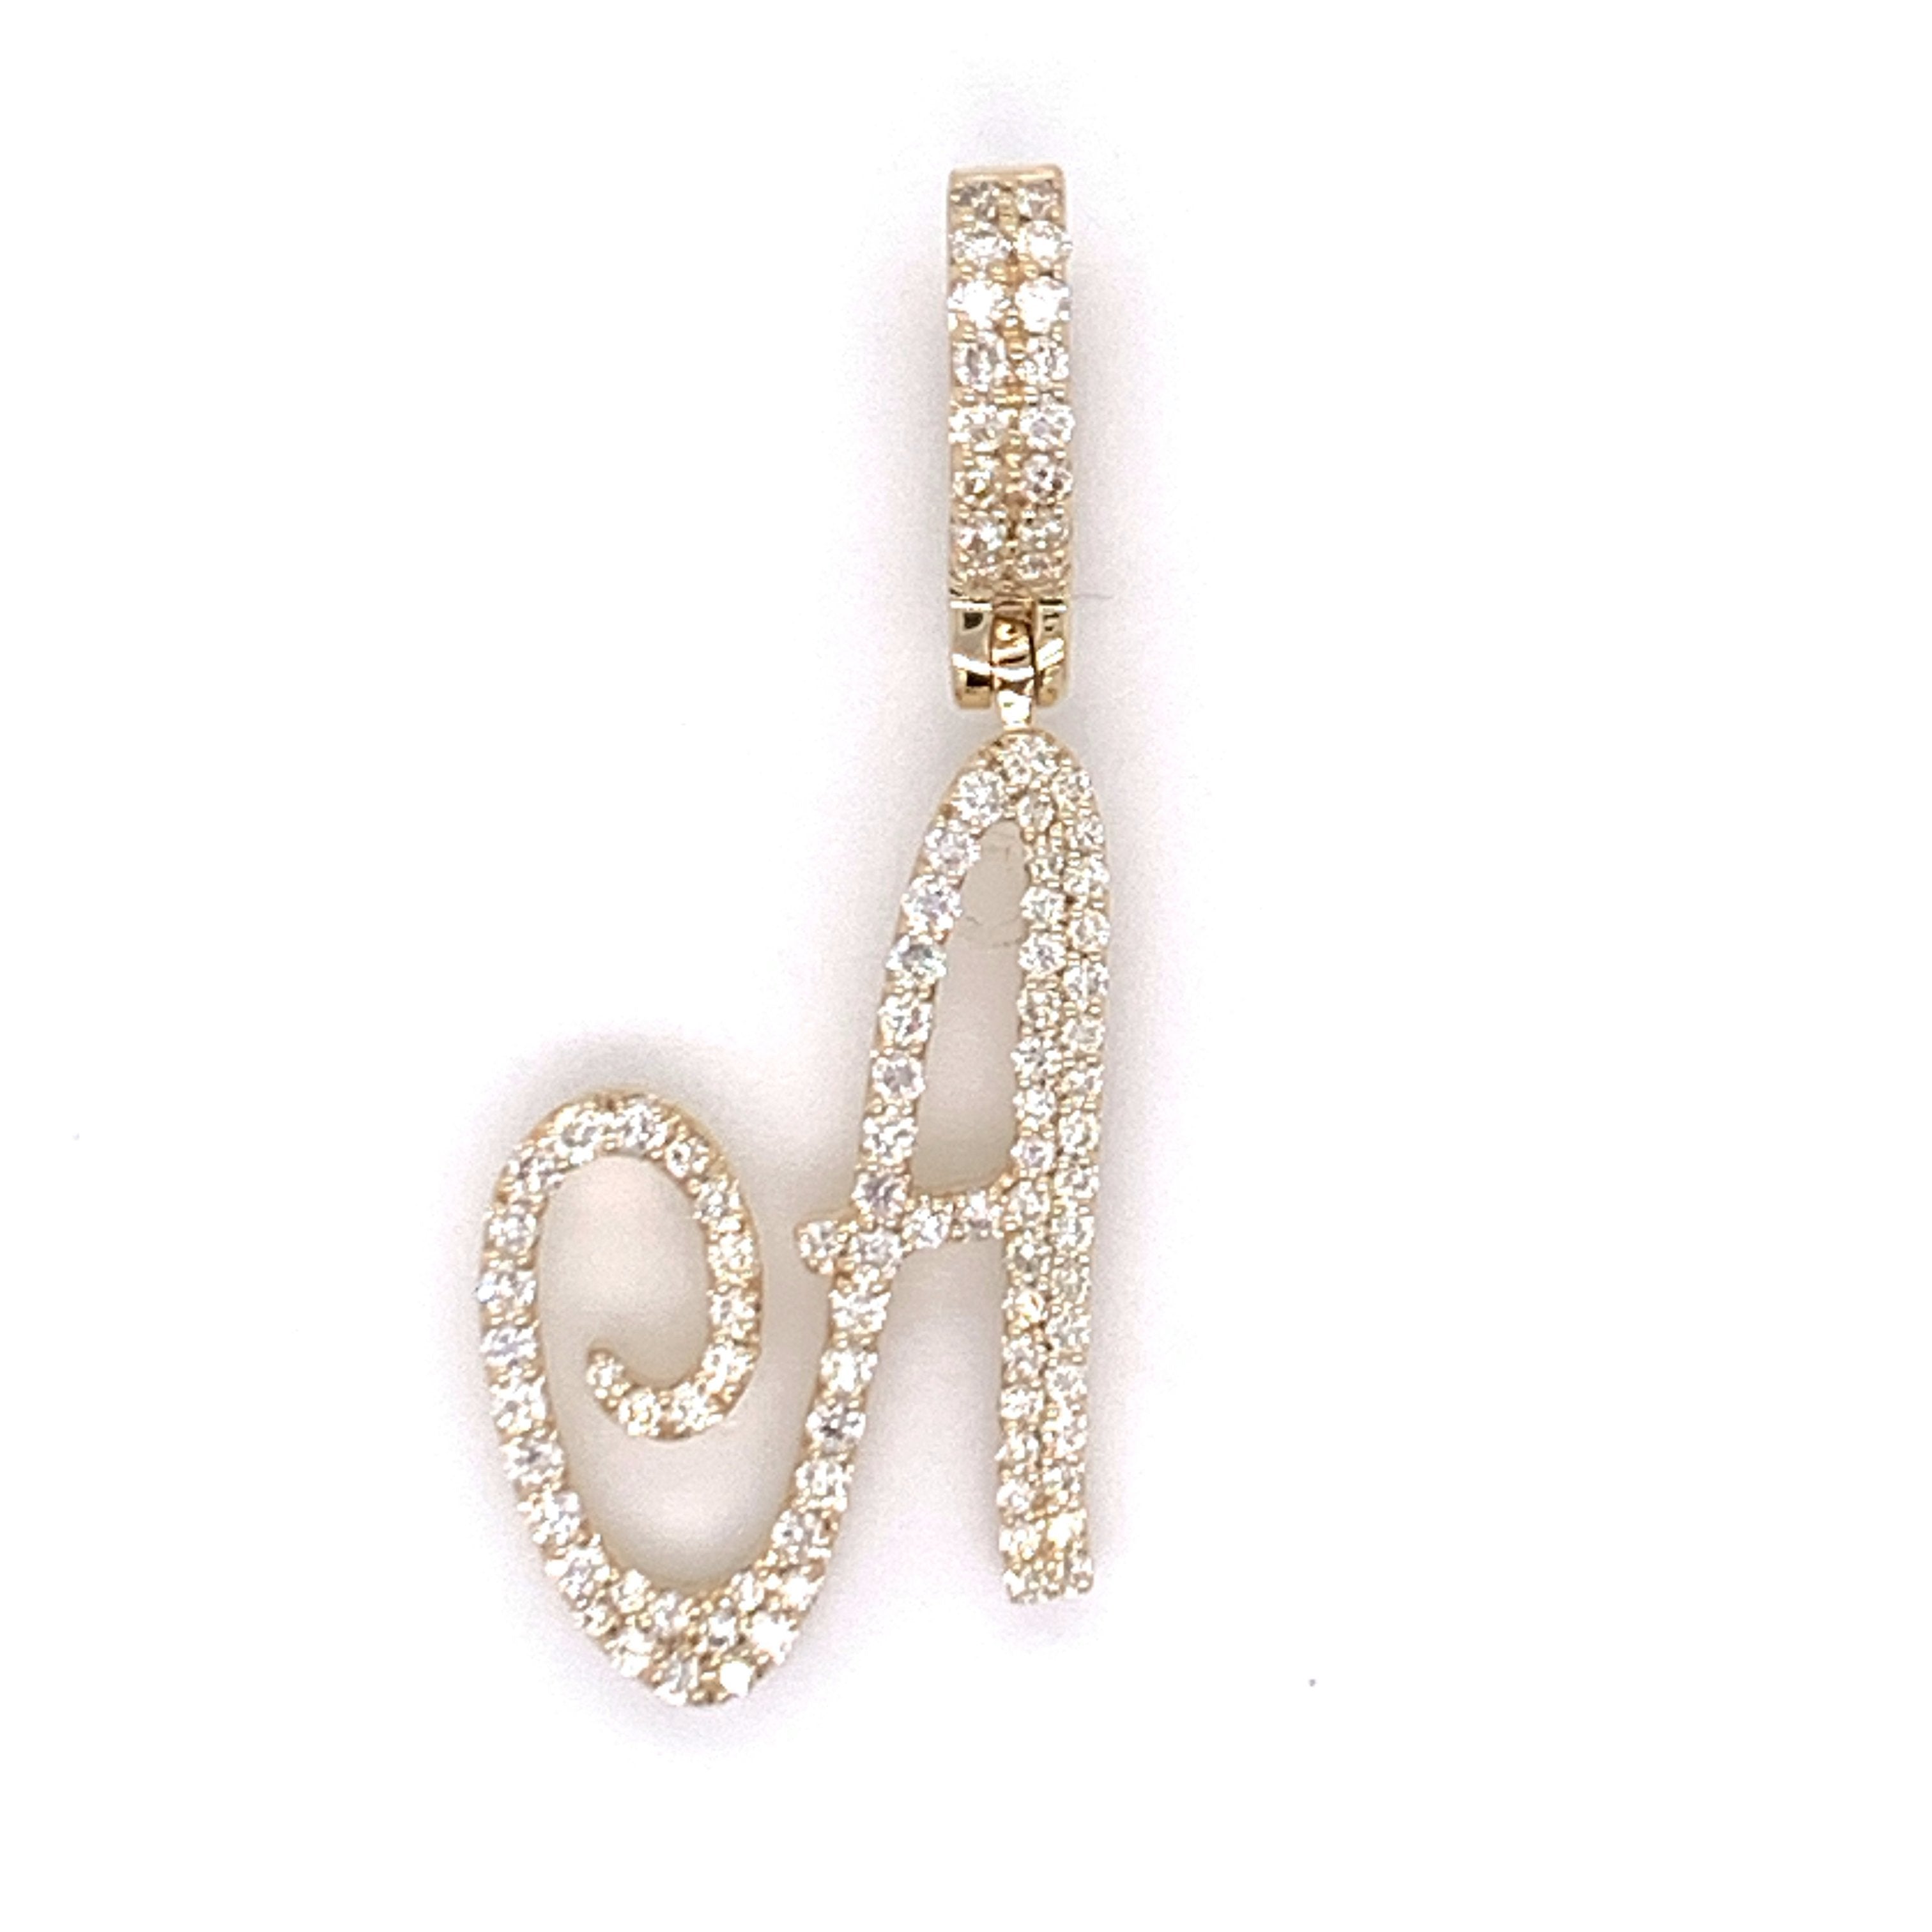 1.00 CT. Diamond Initial "A" Pendant in Gold With Chain - White Carat Diamonds 